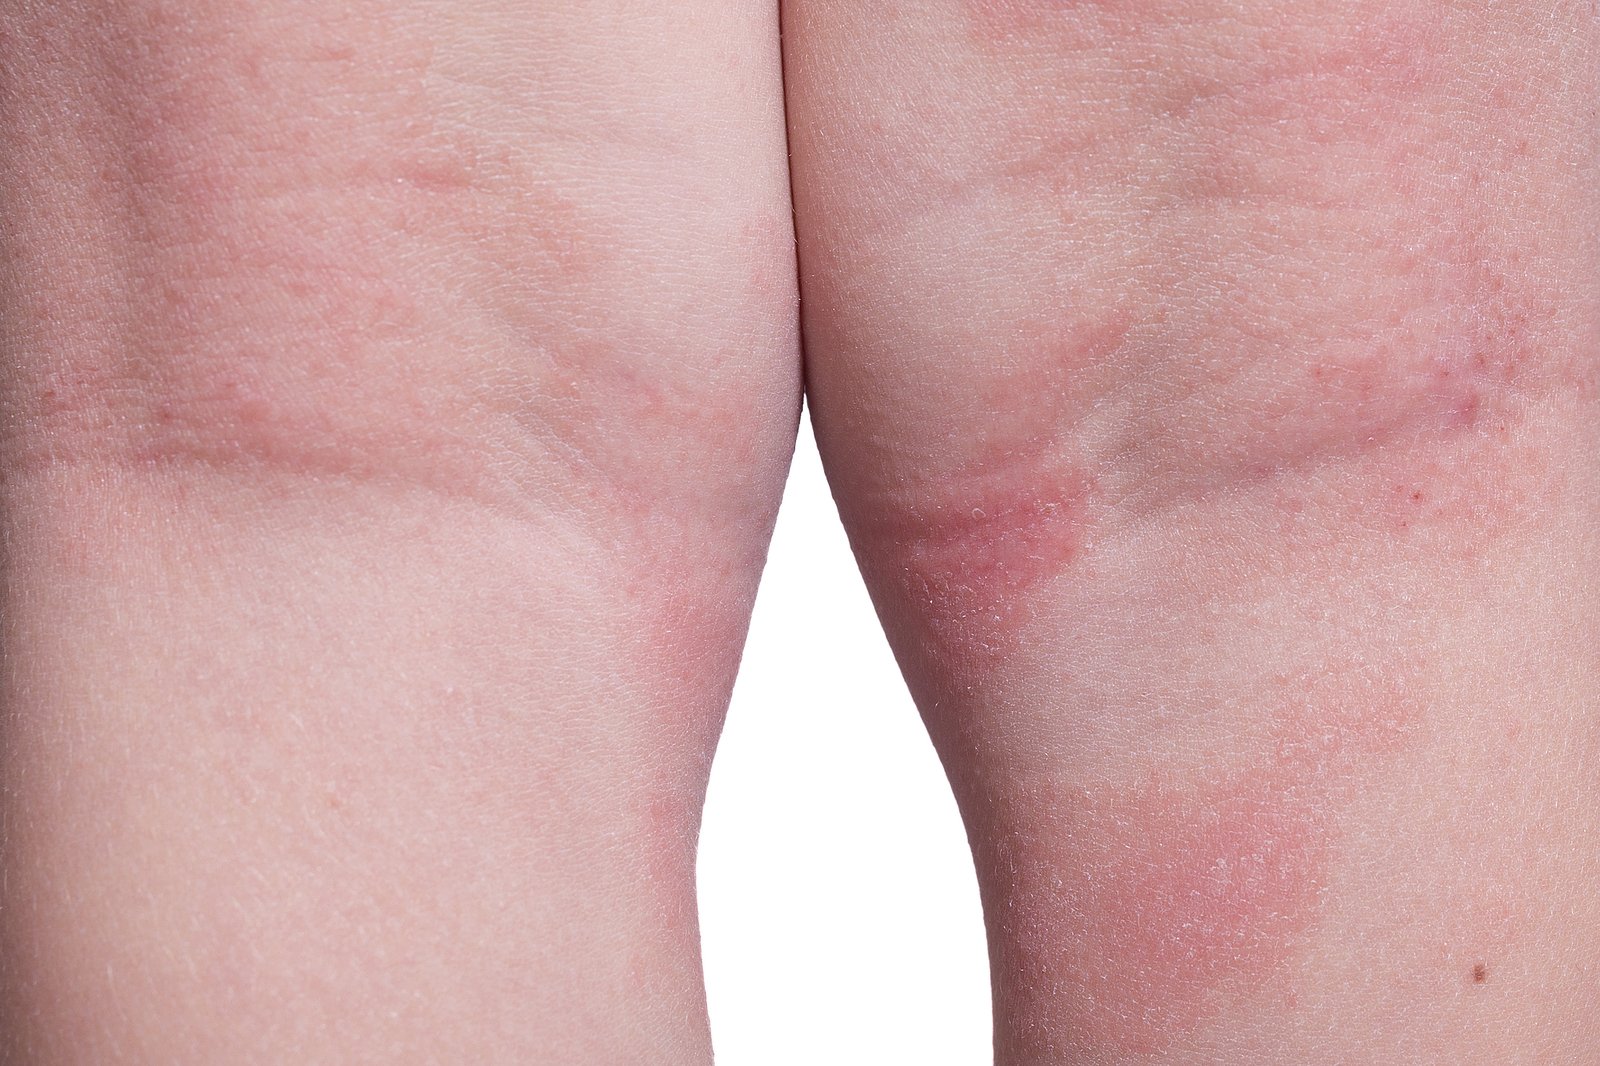 How to Treat Eczema from the Inside Out